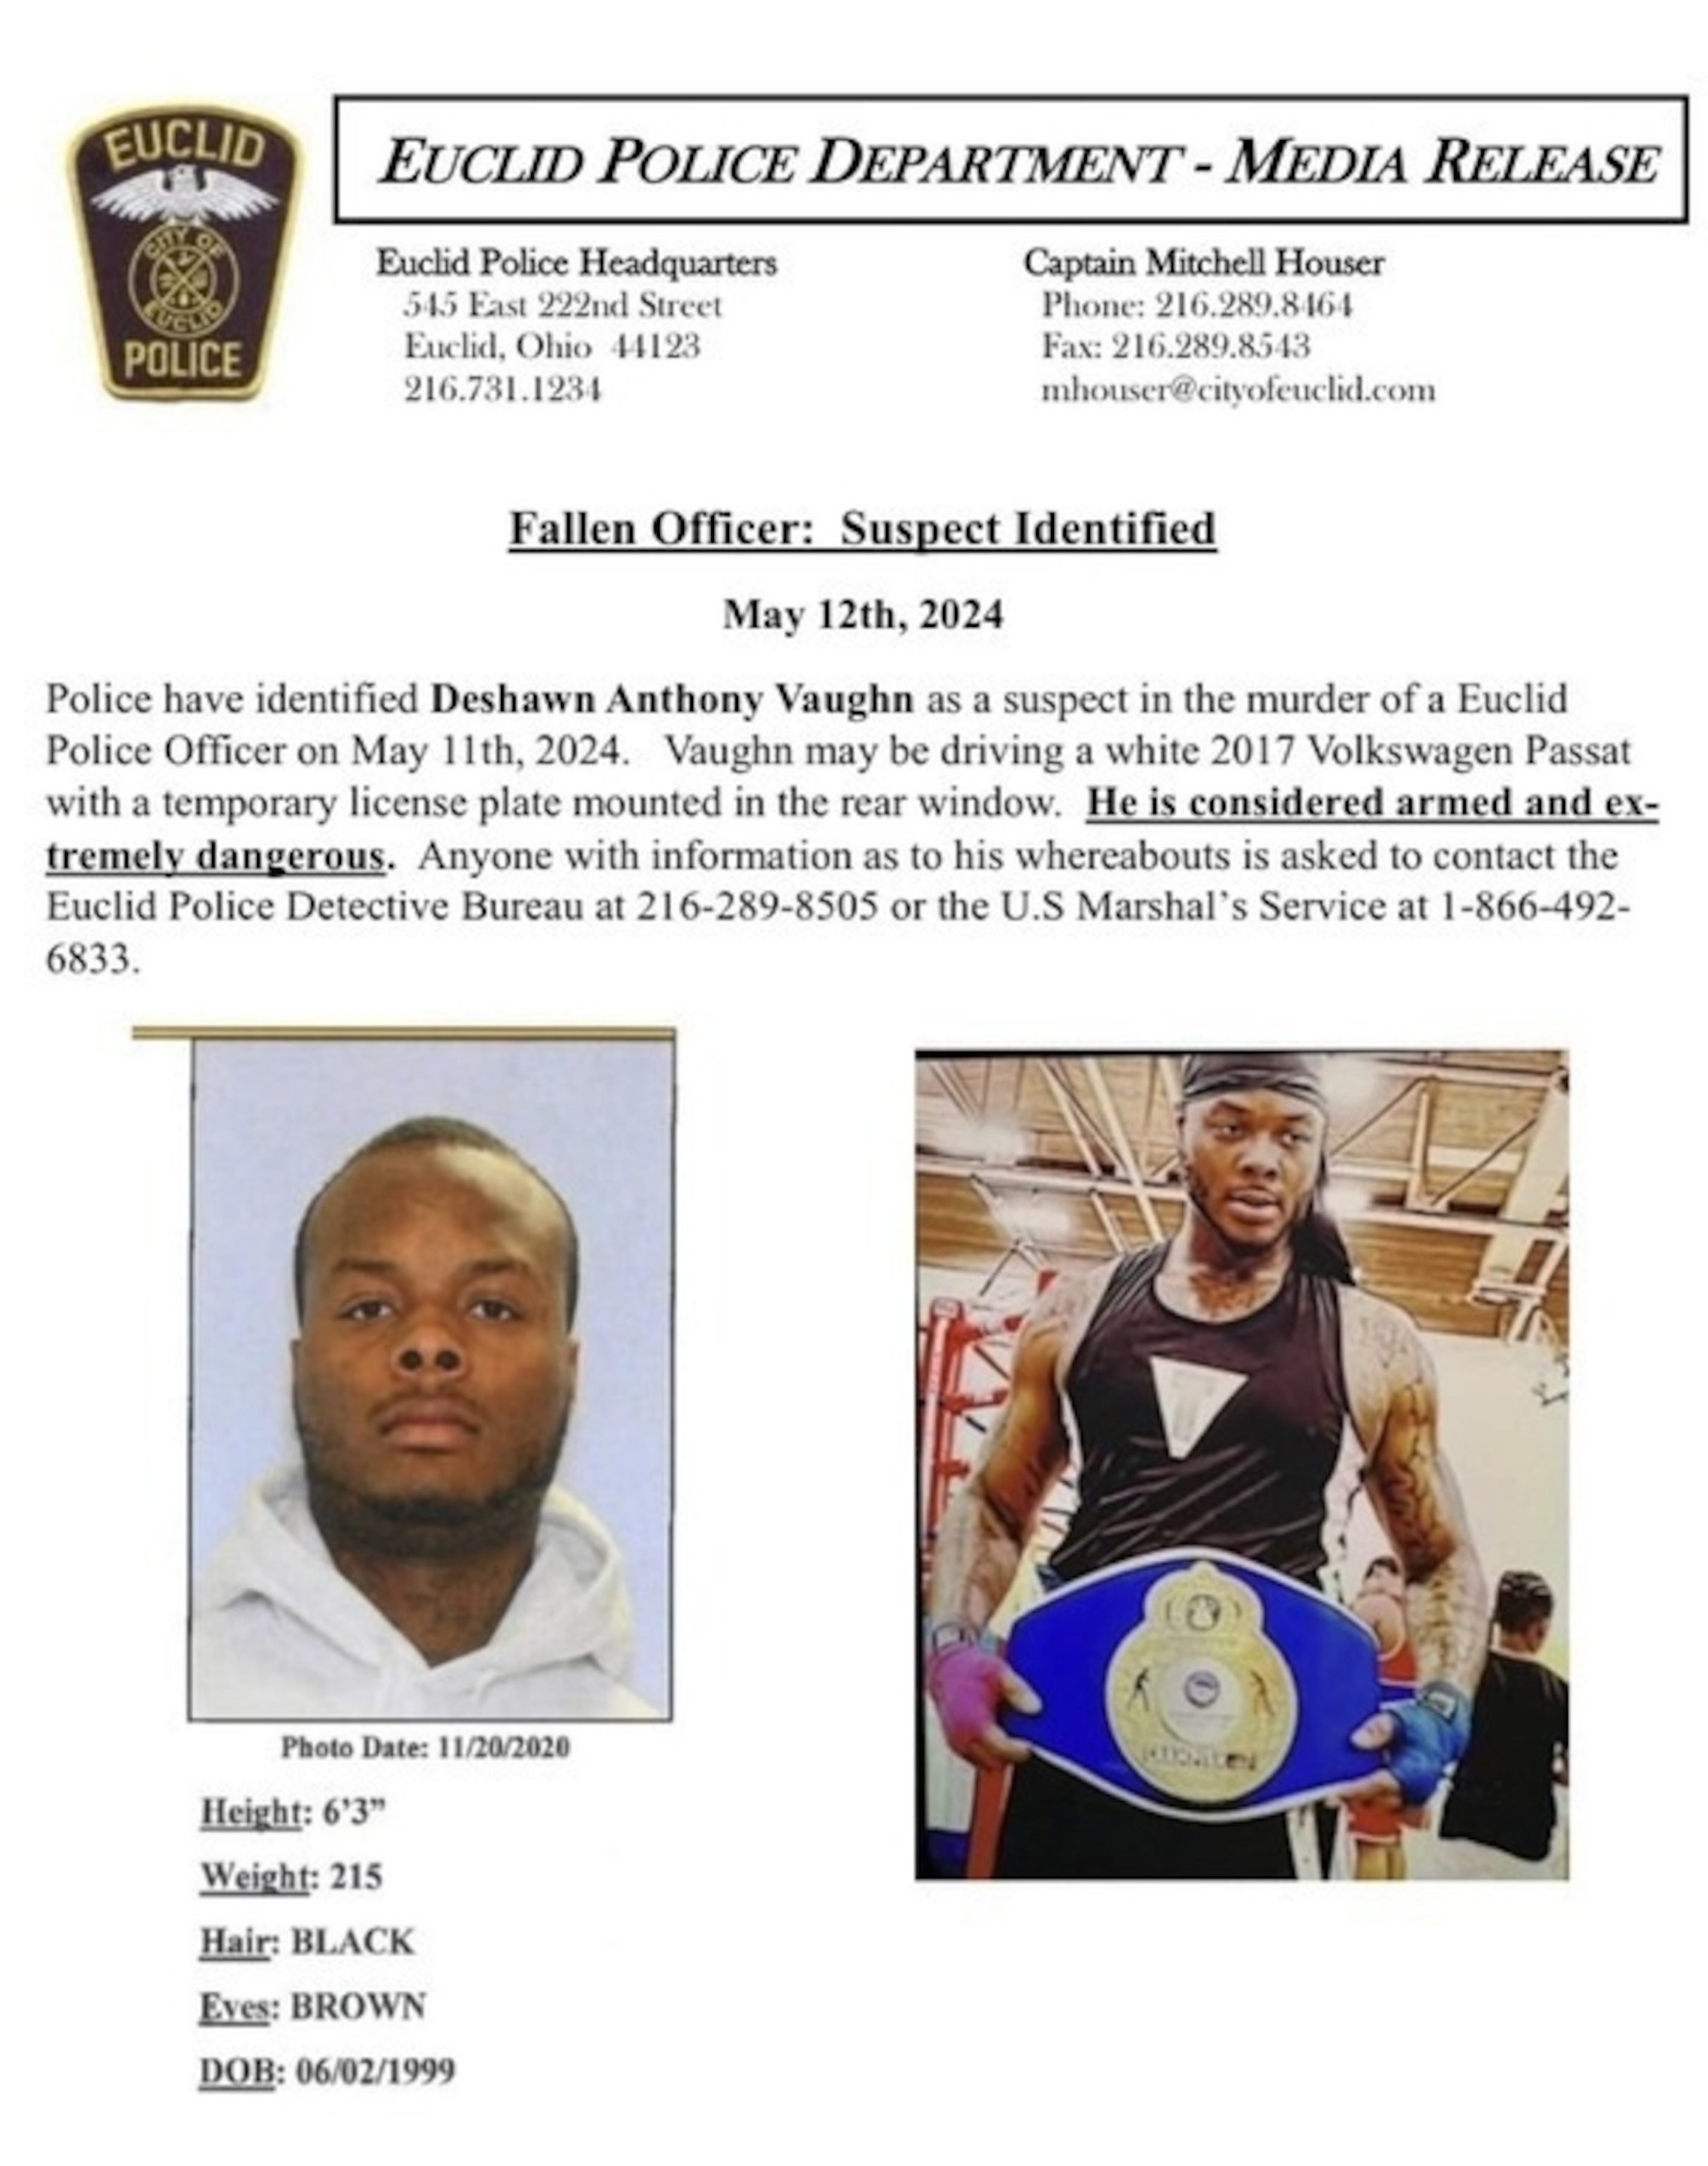 PHOTO: The Euclid, Ohio, Police Department announced that they are searching for Deshawn Anthony Vaughn, 24, as a suspect in the fatal shooting of the officer on May 11, 2024.